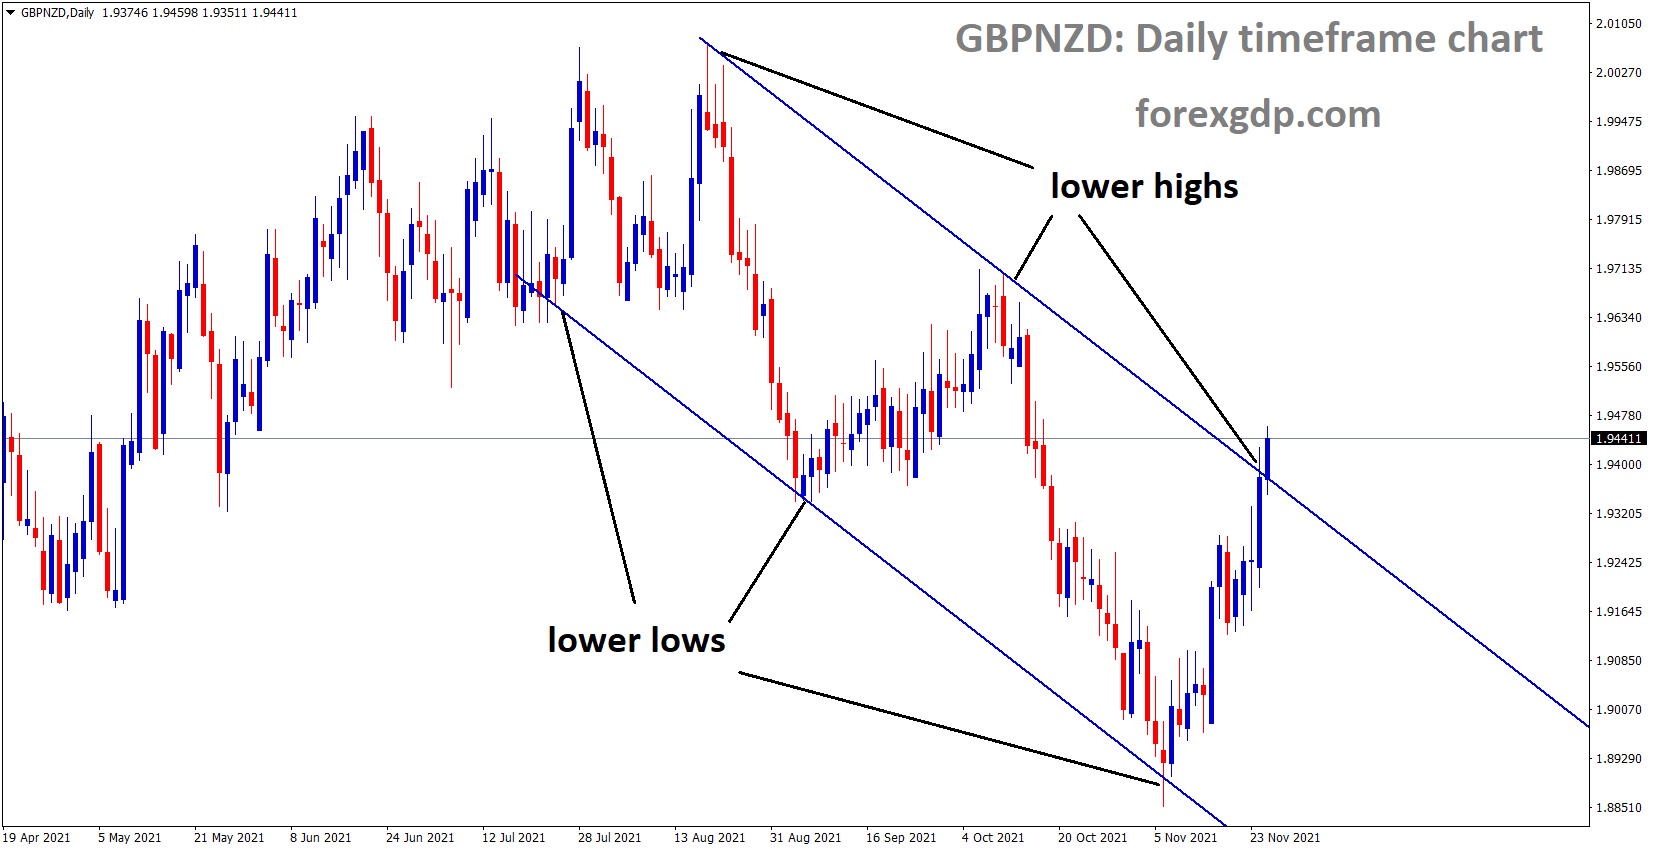 GBPNZD is moving in the Descending channel and the market reached the lower high area of the channel